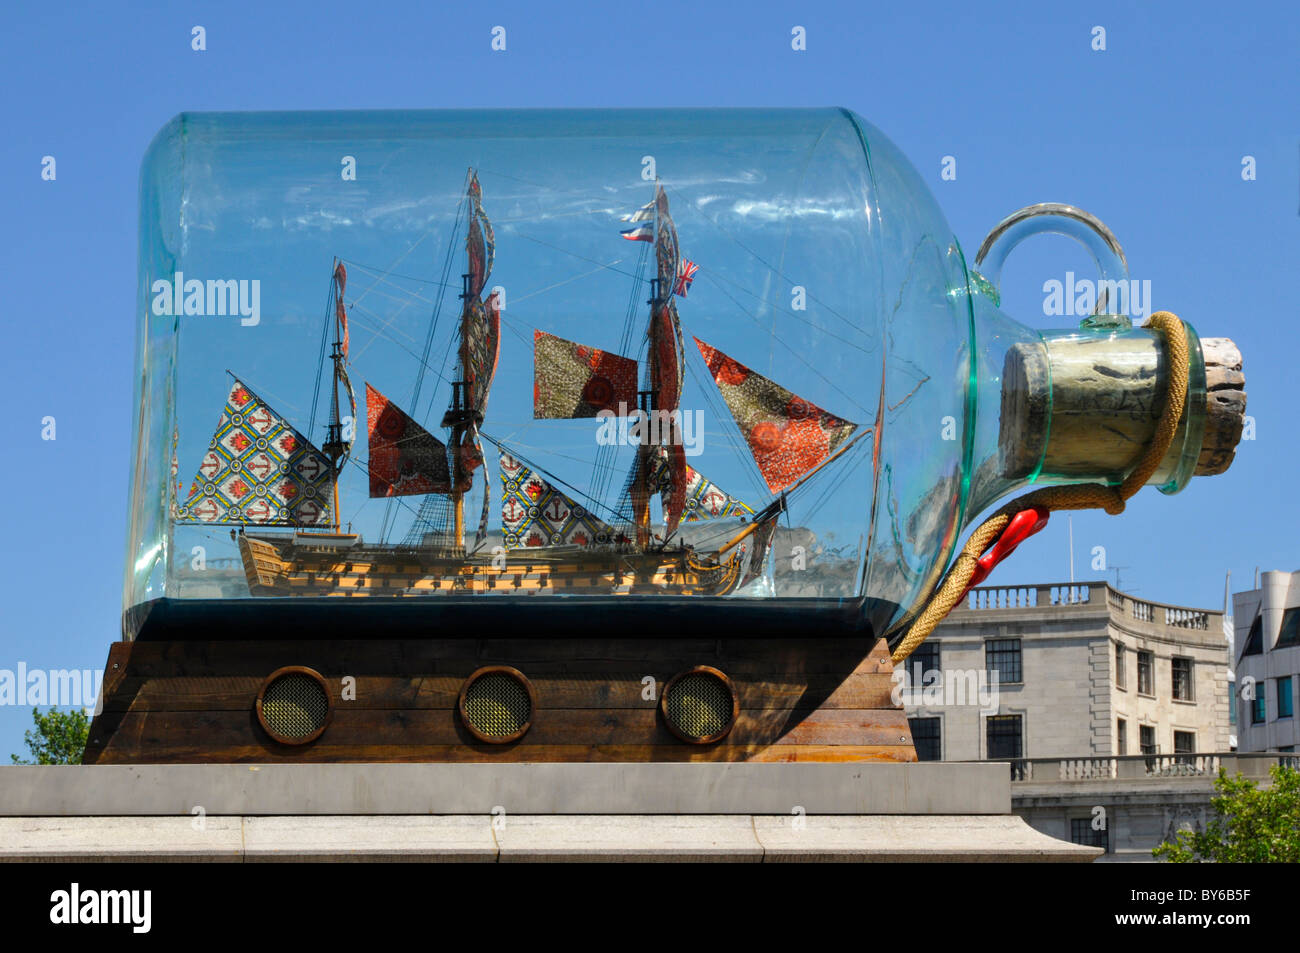 Close up of art model of Nelsons flagship Victory in a bottle by Yinka Shonibare artwork on fourth plinth in Trafalgar Square London England UK Stock Photo